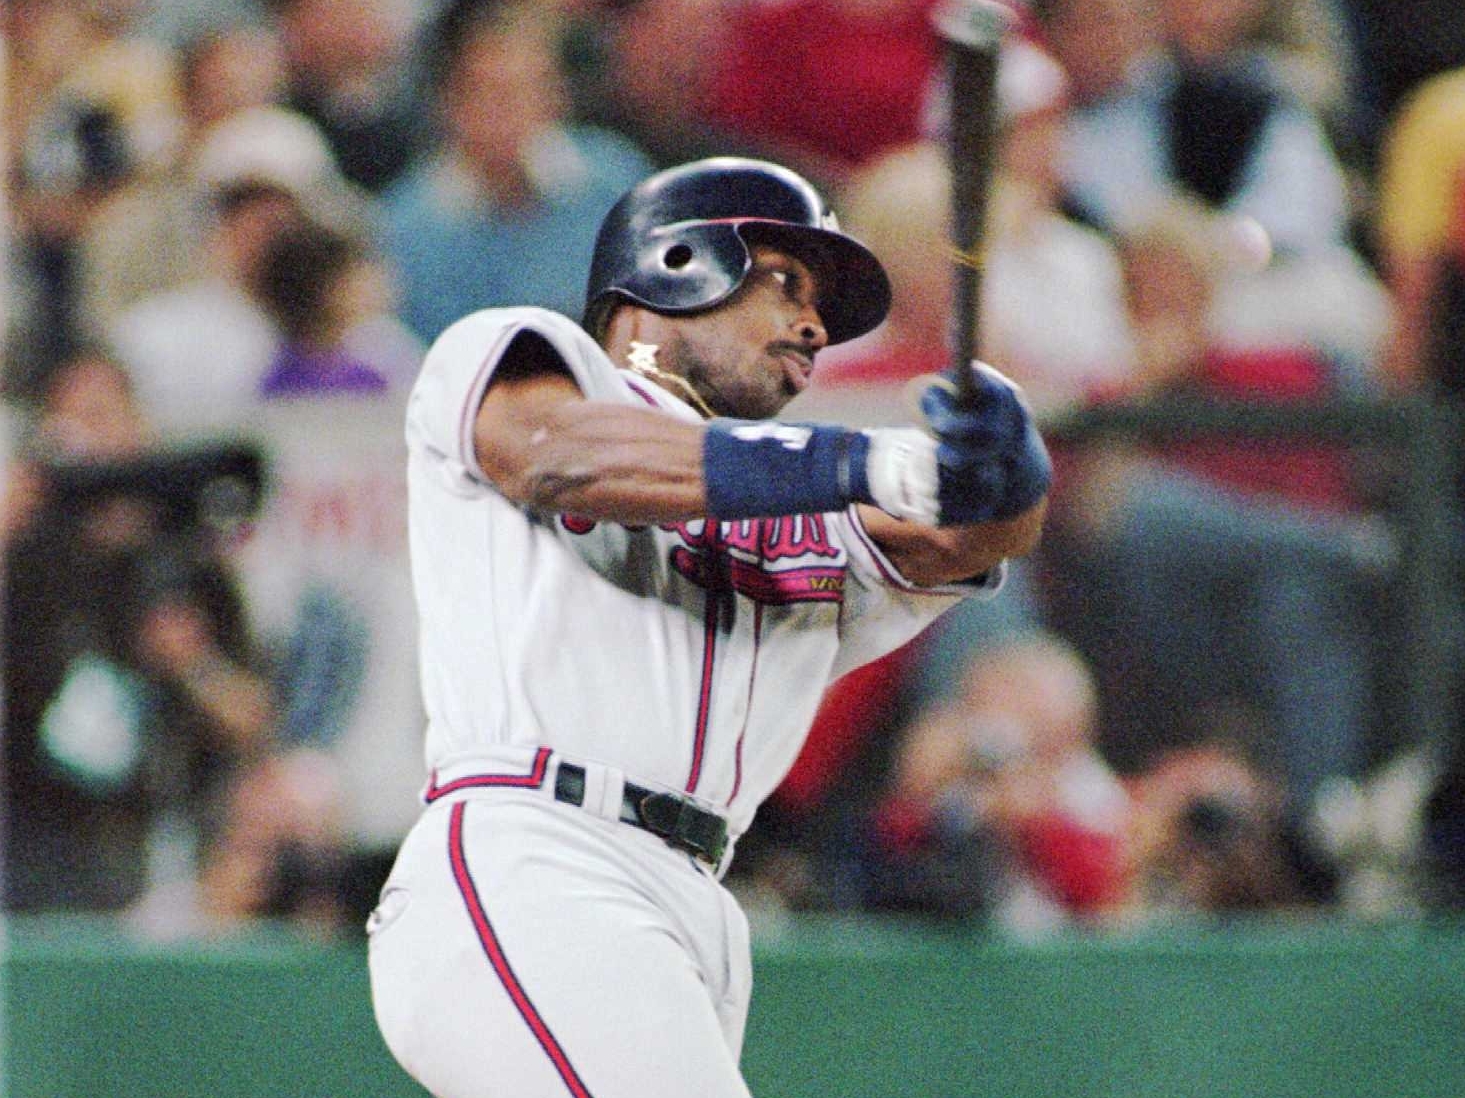 Fan favorite Fred McGriff enters the Baseball Hall of Fame